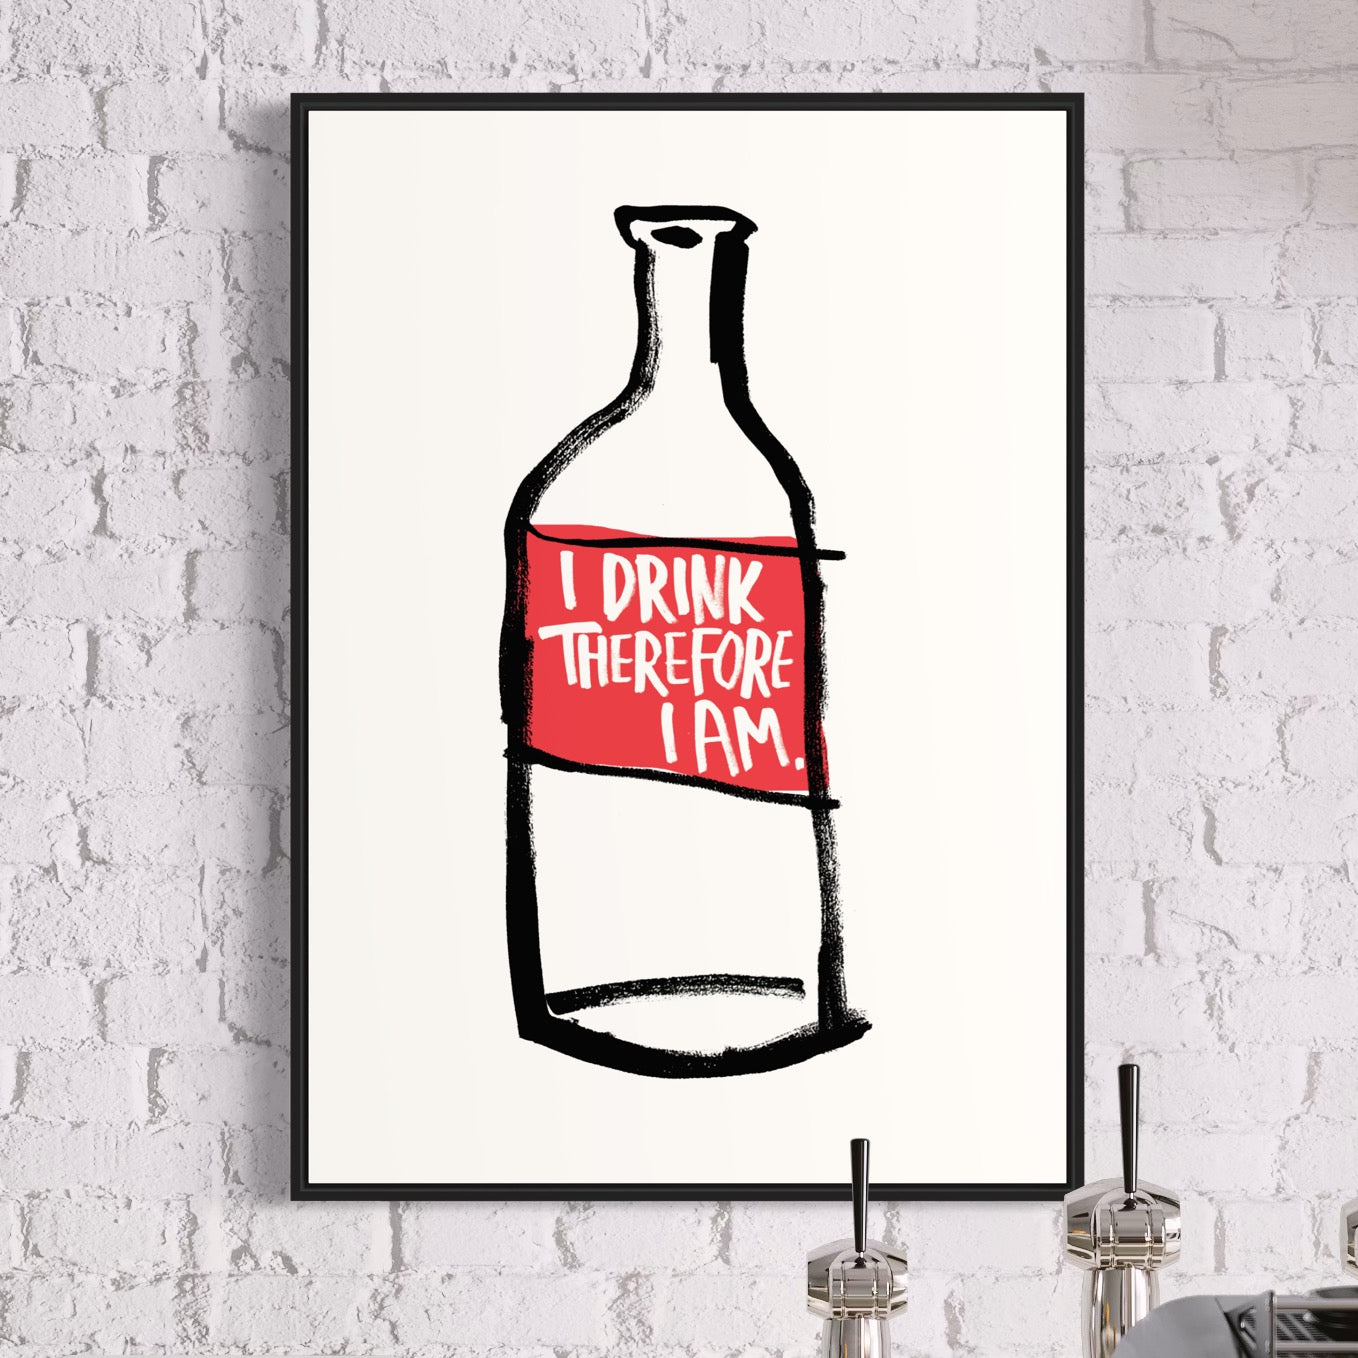 I Drink Therefore I Am print